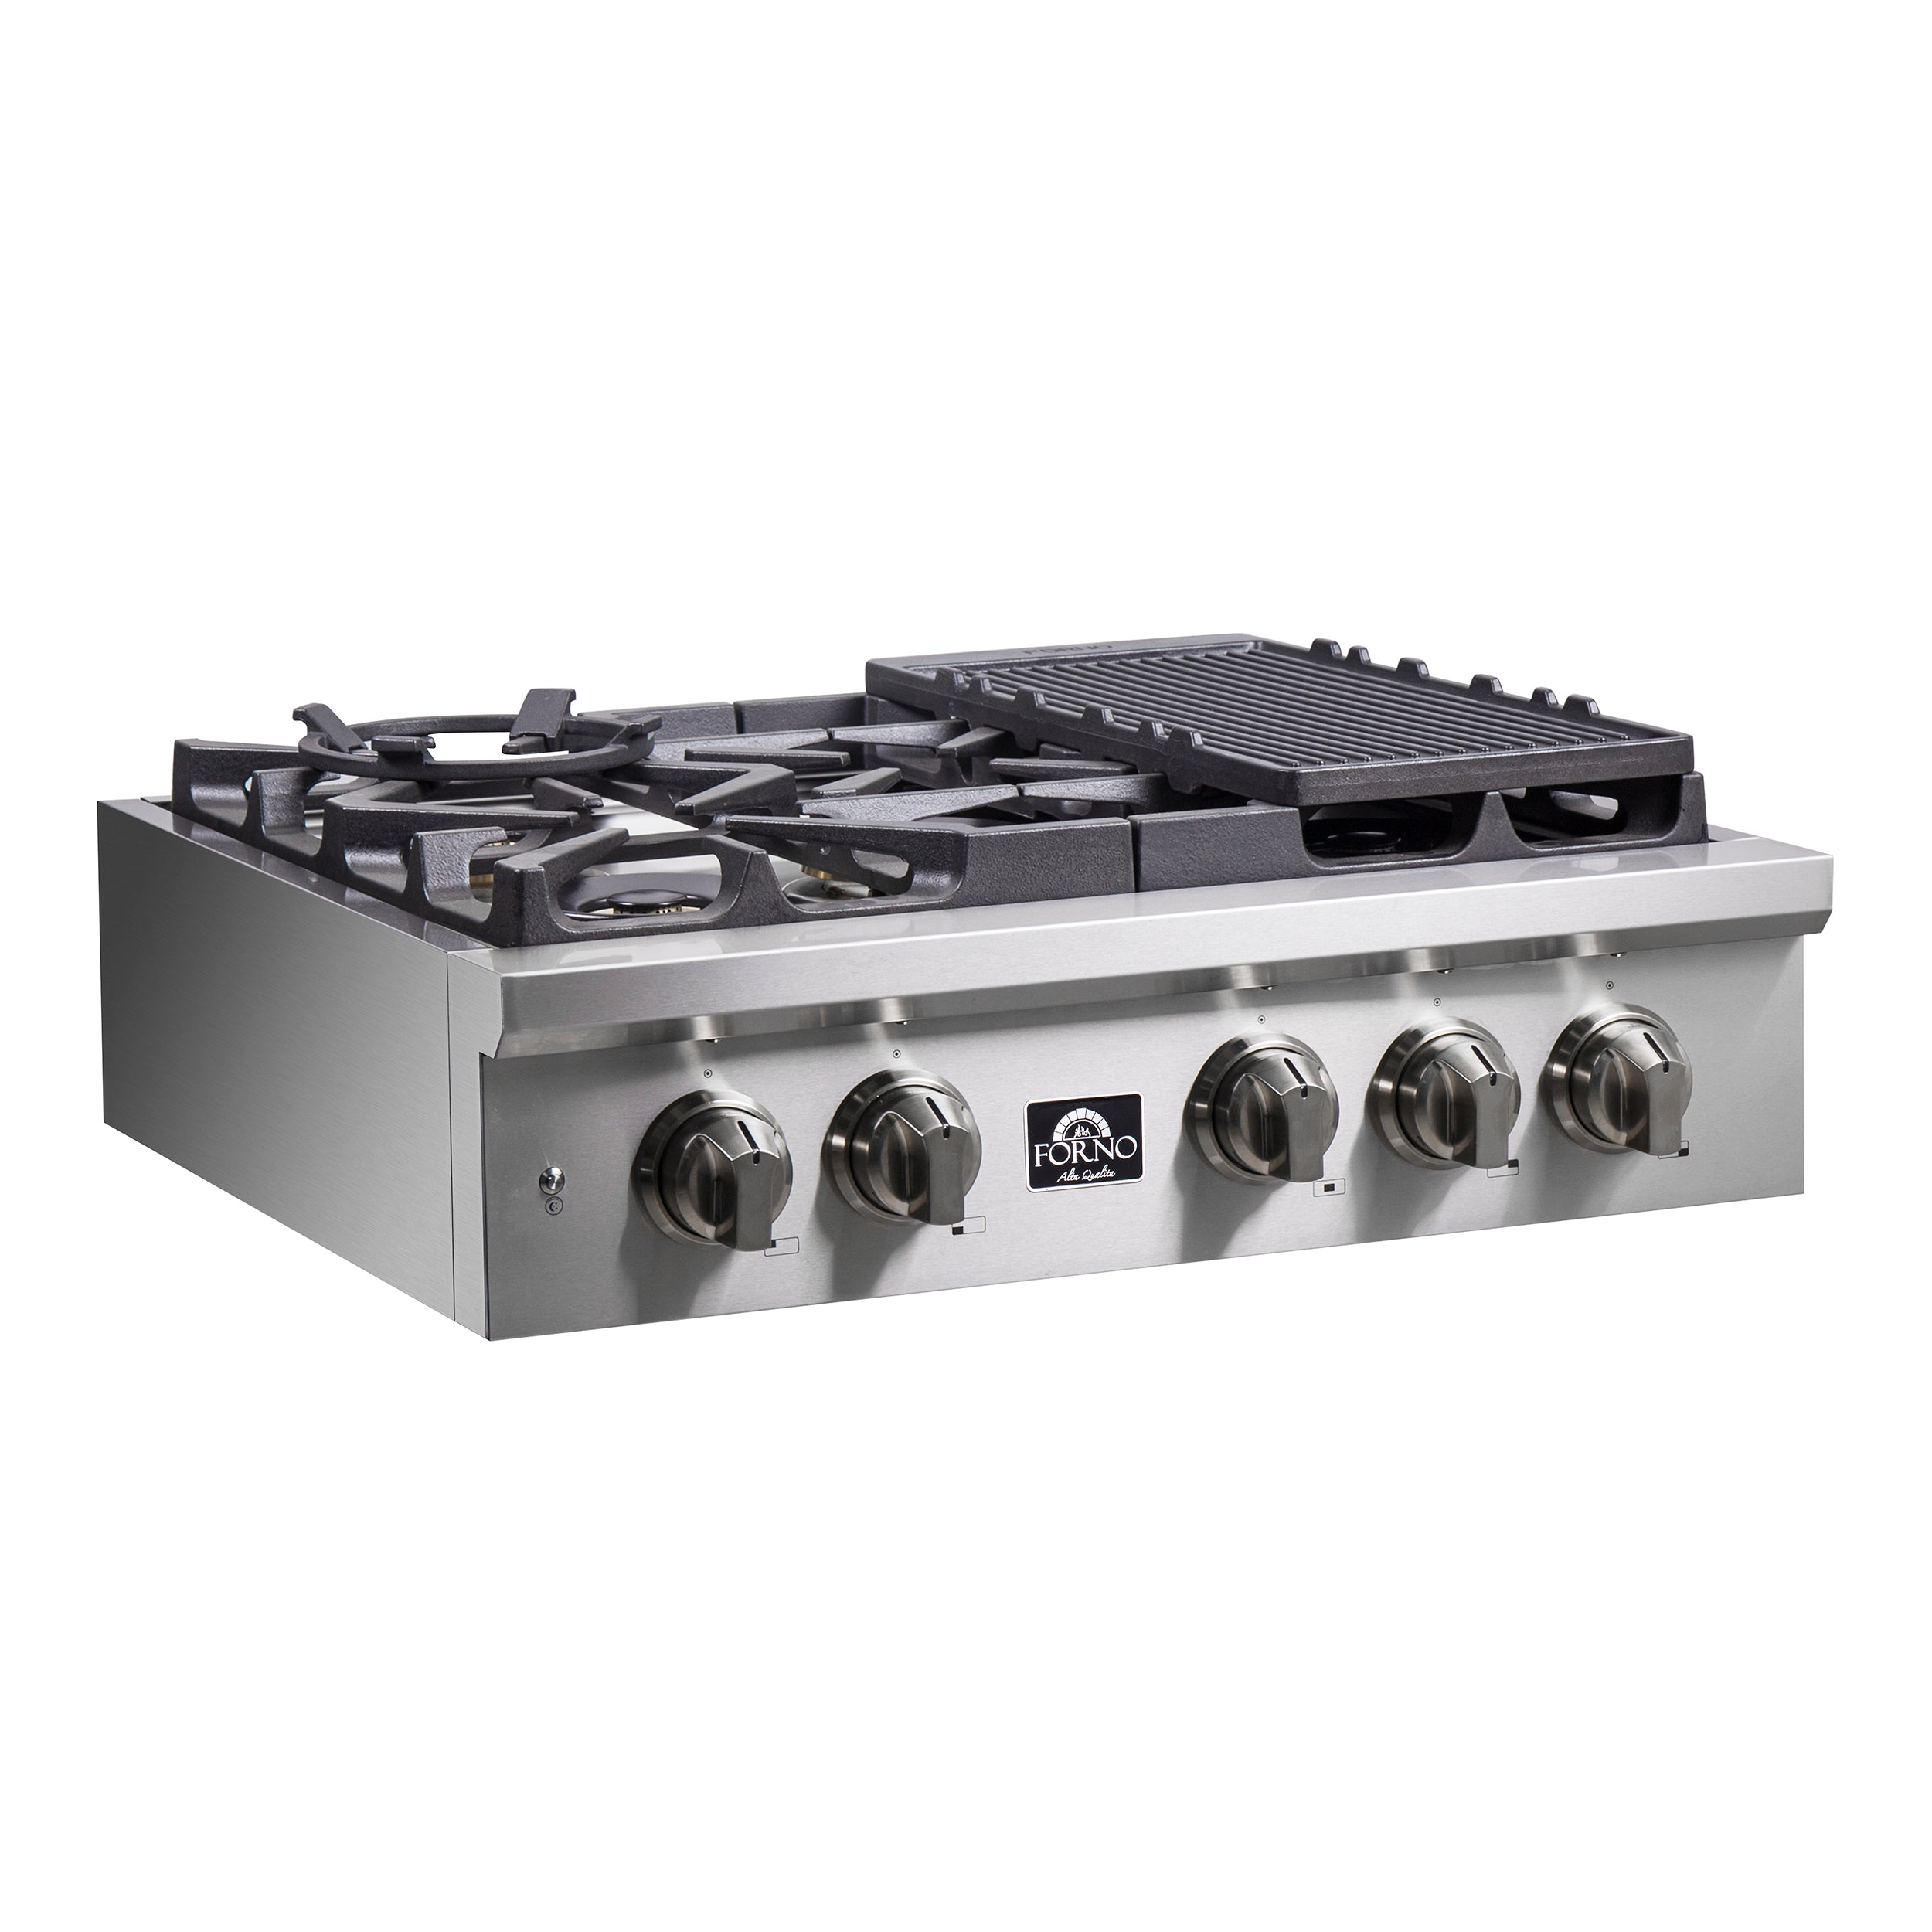 Forno Spezia 30 in. 5 Burner Gas Cooktop with Wok Ring and Griddle in Stainless Steel (FCTGS5751-30)